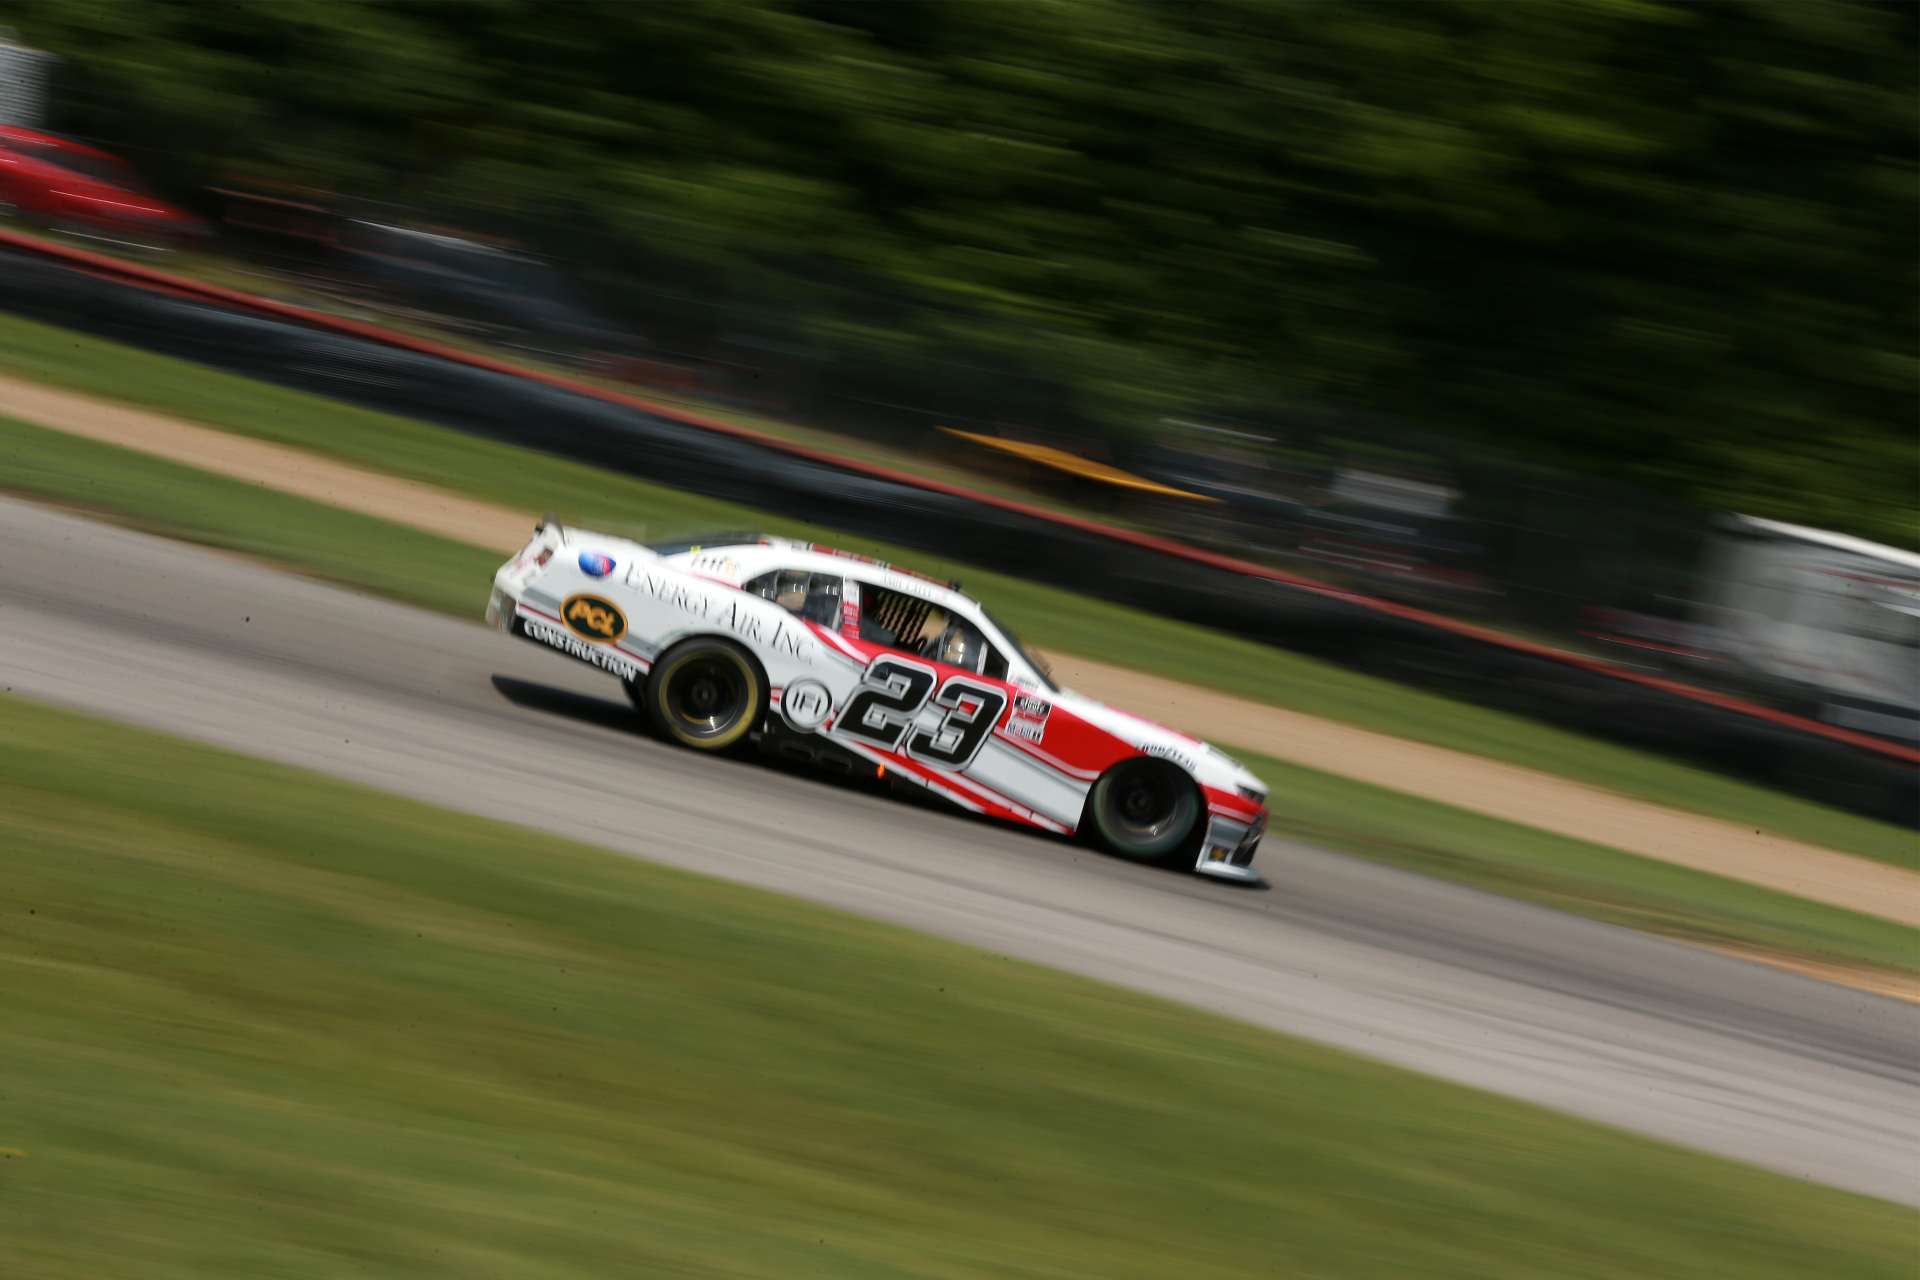 LEXINGTON, OHIO - JUNE 05: Andy Lally, driver of the #23 UCC/Energy Air Inc Chevrolet, drives during the NASCAR Xfinity Series B&L Transport 170 at Mid-Ohio Sports Car Course on June 05, 2021 in Lexington, Ohio.